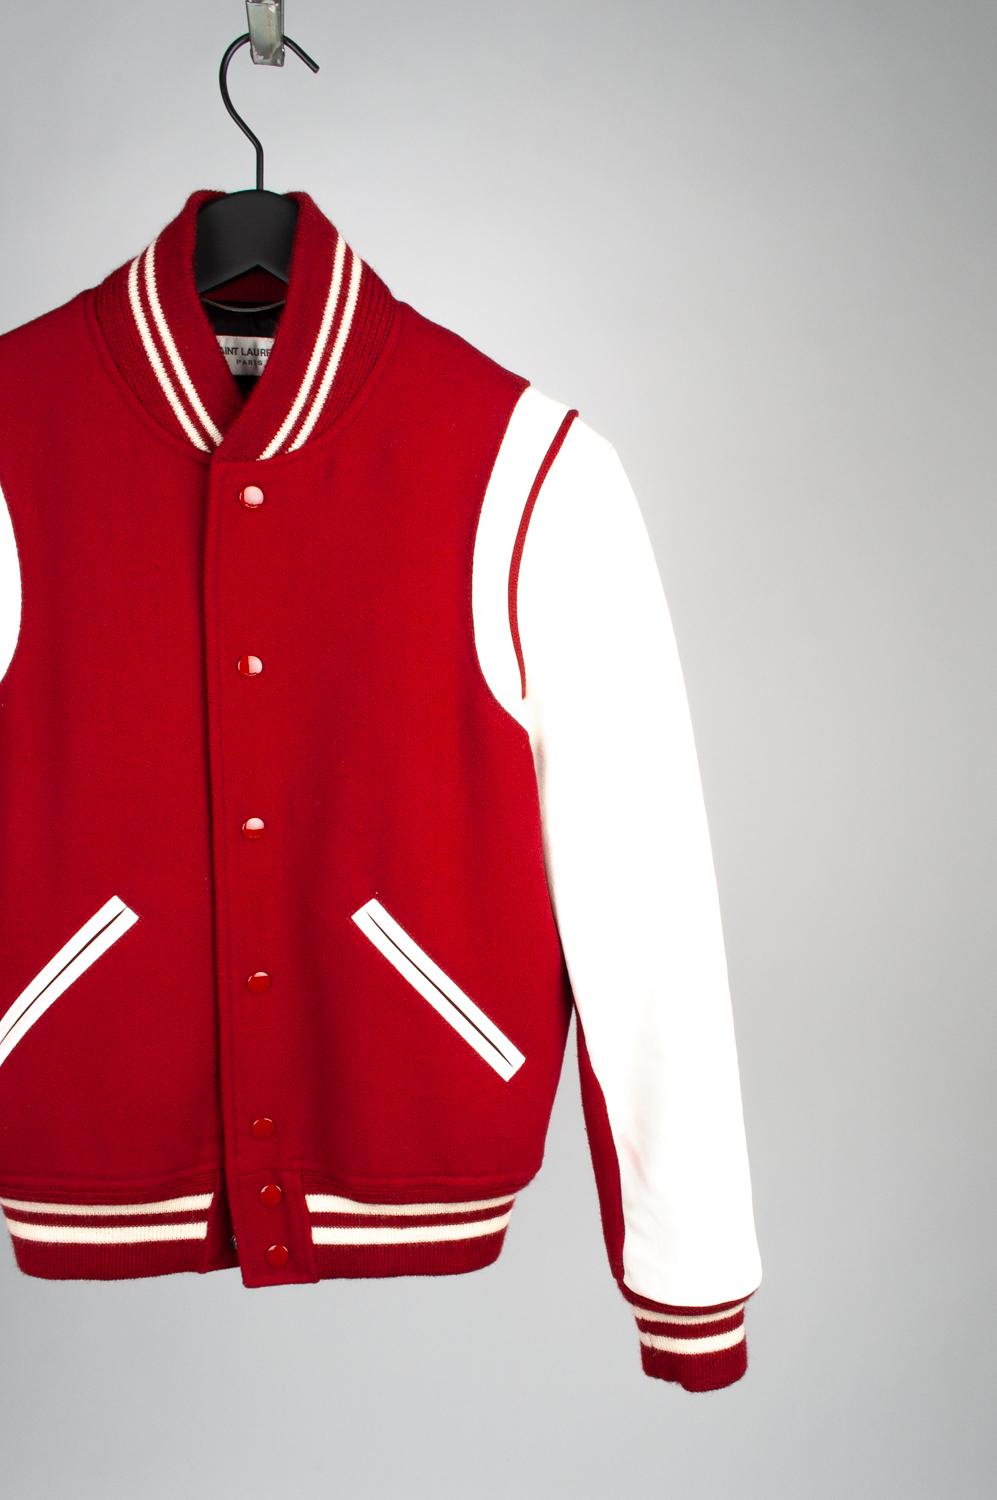 100% genuine Saint Laurent Paris Teddy Bomber, S609
Color: red/white
(An actual color may a bit vary due to individual computer screen interpretation)
Material: Wool/Leather
Tag size: 44IT (Small)
This jacket is great quality item. Rate 8.5 of 10,